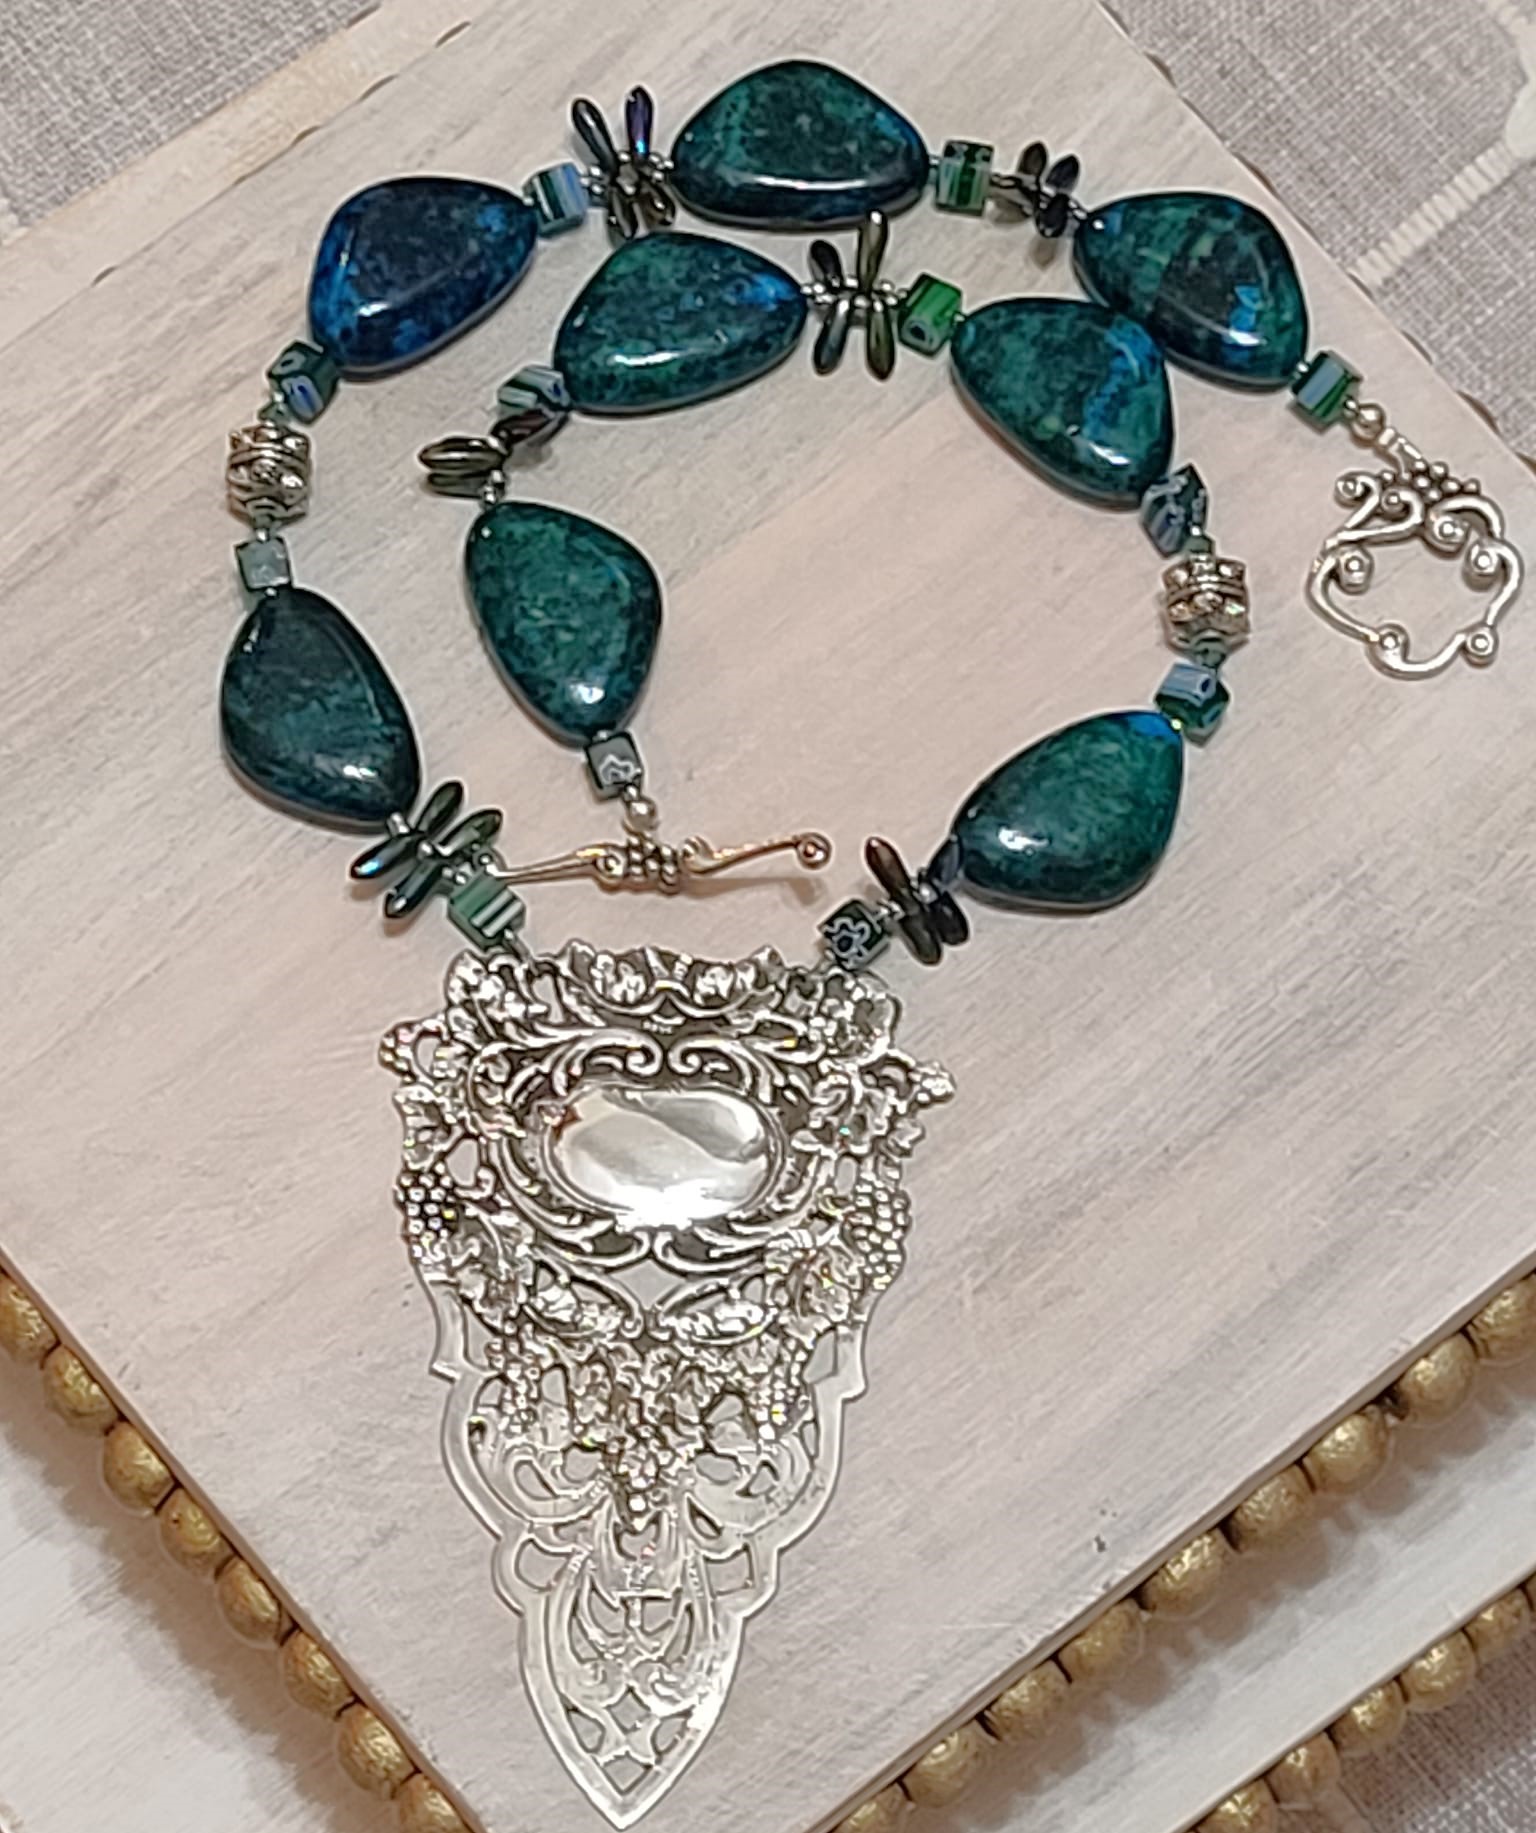 Hancrafted statement necklace,green chrysocolla, sterling silver